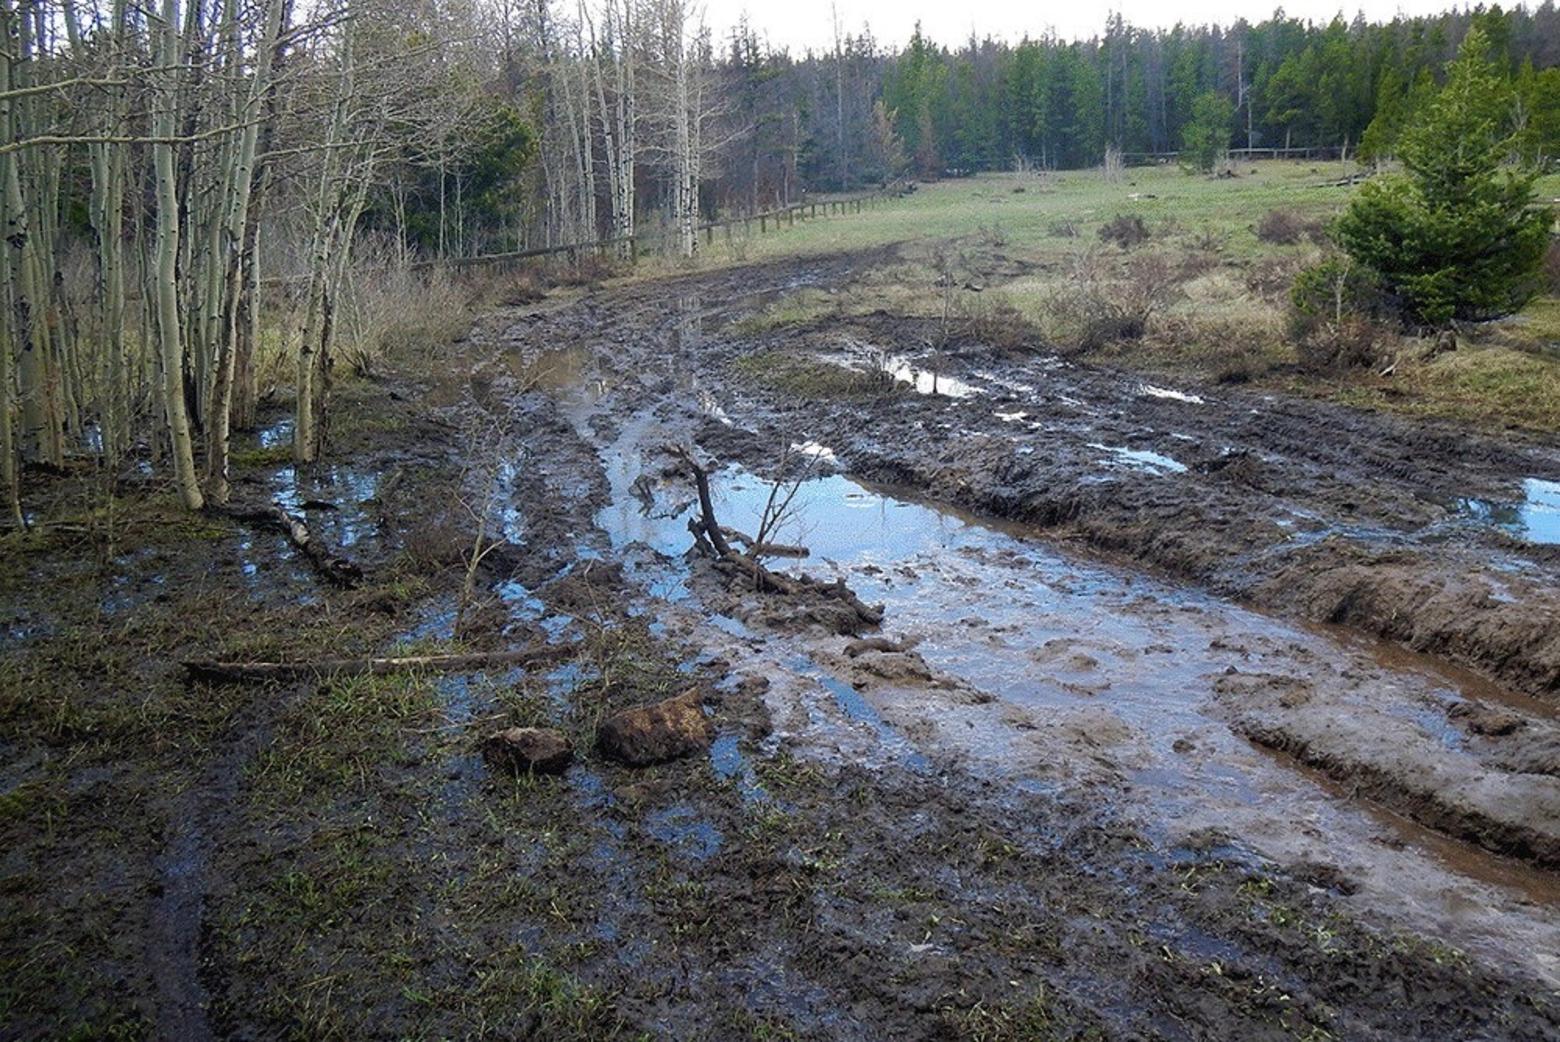 For some national forest users, spring is "mud bogging" season on public lands. The Rocky Mountain Region of the US Forest Service shared this photograph of impacts caused by illegal ATV use. While physical damage to trails caused by users who enter closed areas or venture off trails is not uncommon, a growing concern among wildlife conservationists is the impacts of rising numbers of recreation users that fragment secure habitat and cause wildlife to flee areas where they want to be.  The Forest Service put the following caption on the photo: "Mud bogging leaves lasting scars and may cause harmful impacts to fish and wildlife by destroying habitat (food, shelter, water and space)."  Photo courtesy US Forest Service/Rocky Mountain Region